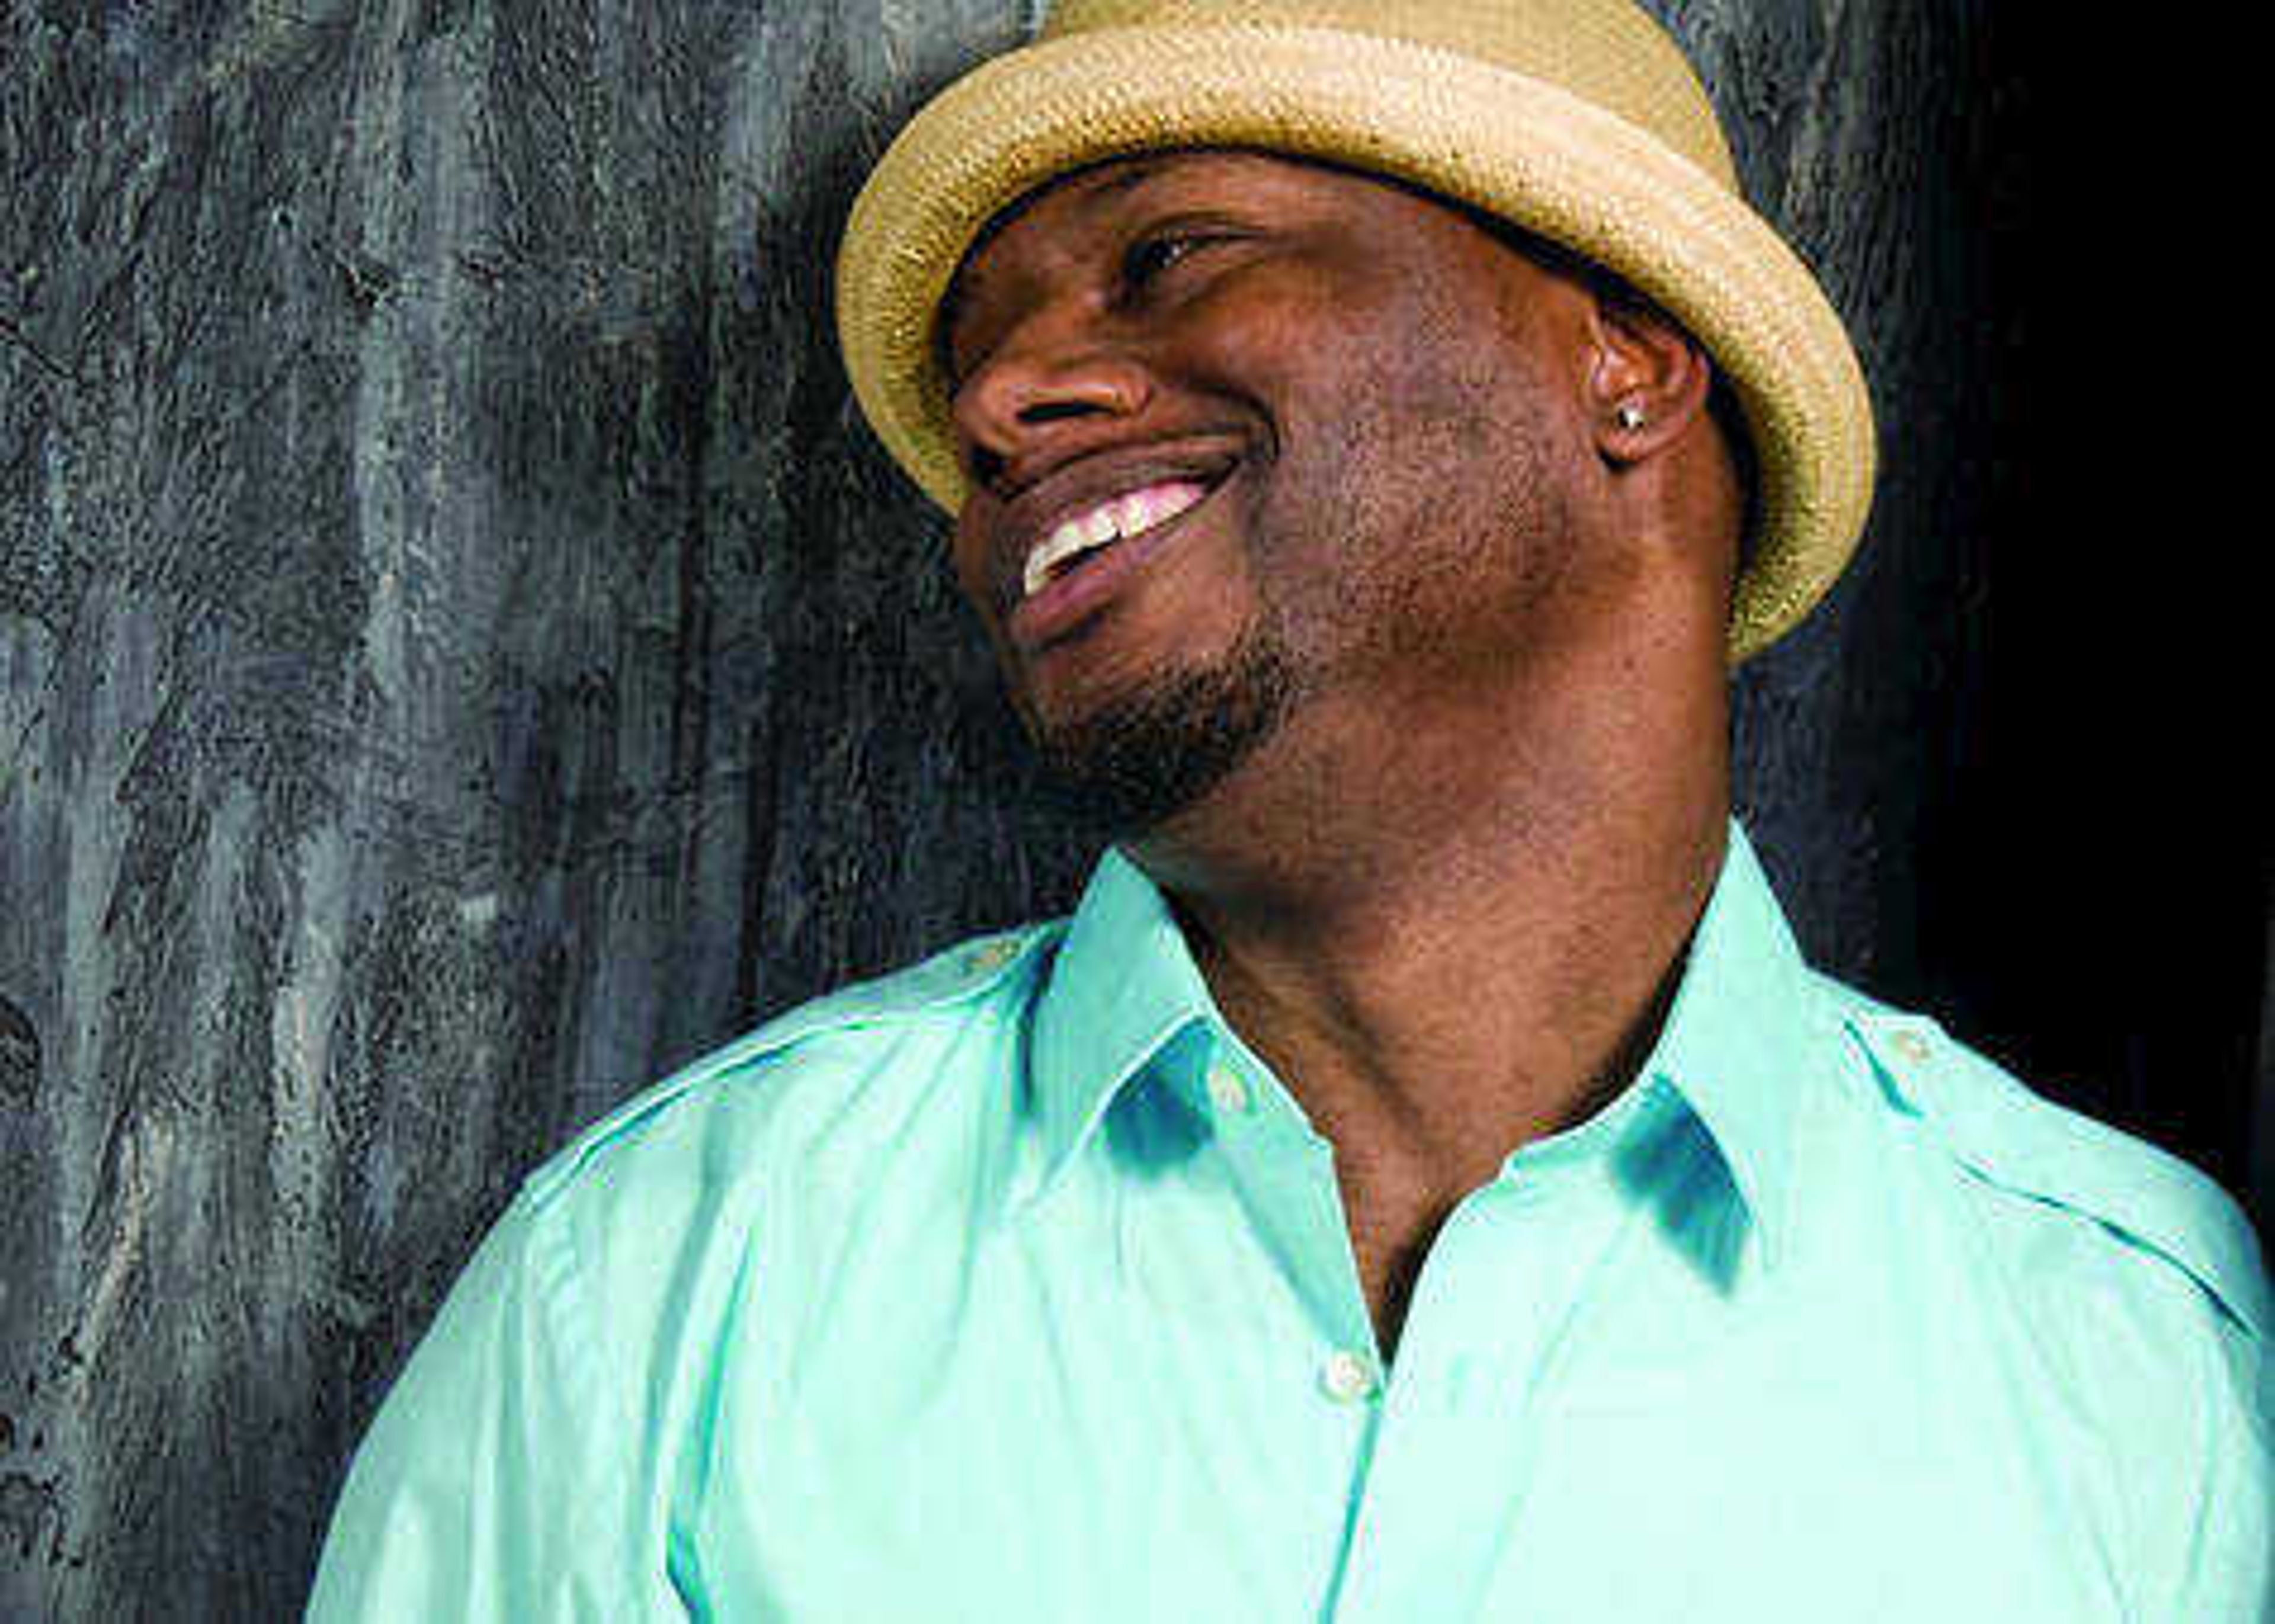 Arvin Mitchell will perform at 8 p.m. Wednesday in Rose Theatre located within Grauel Building. Submitted photo